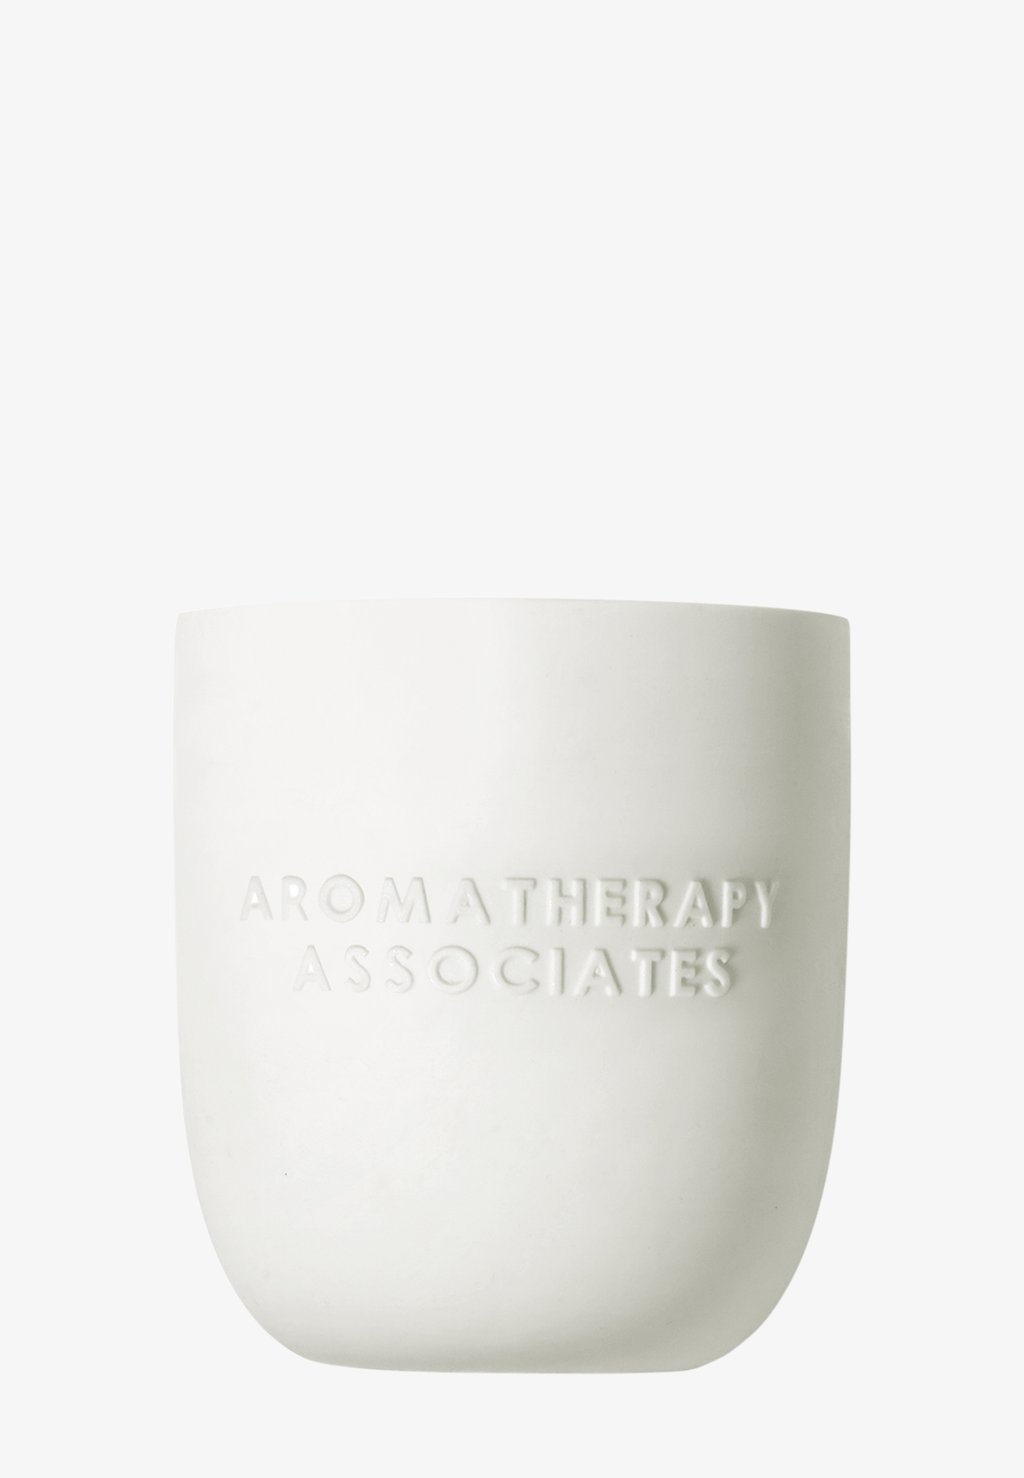 Ароматическая свеча Rose Candle Aromatherapy Associates aromatherapy candle european style romantic handmade aromatherapy candle hand gift natural plant essential oil smokeless soy wax